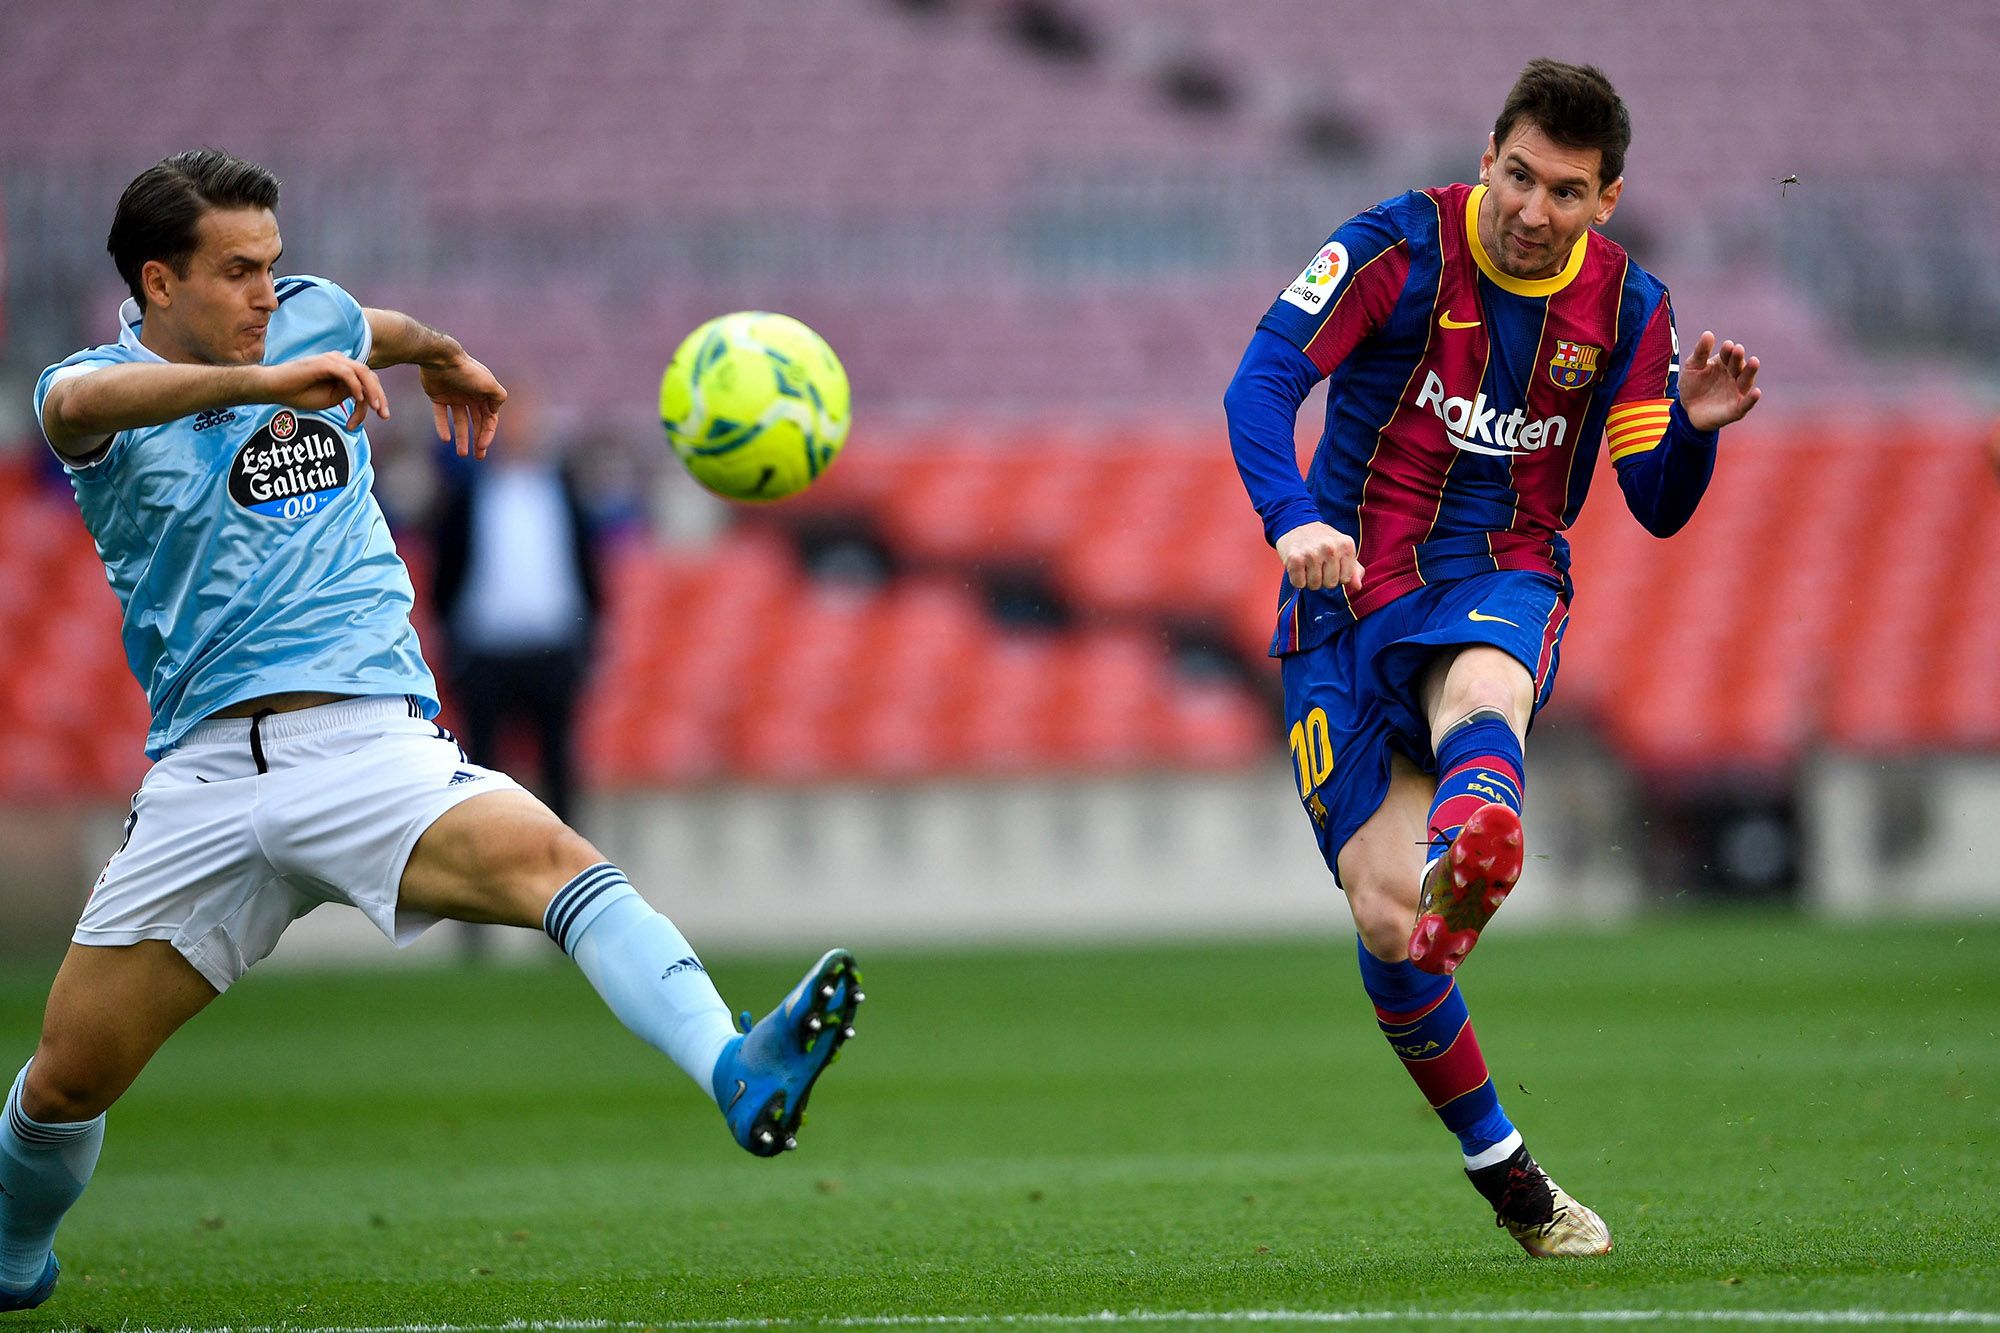 Lionel Messi Nears Deal With Football Club Barcelona at 50% Pay Cut - Bloomberg